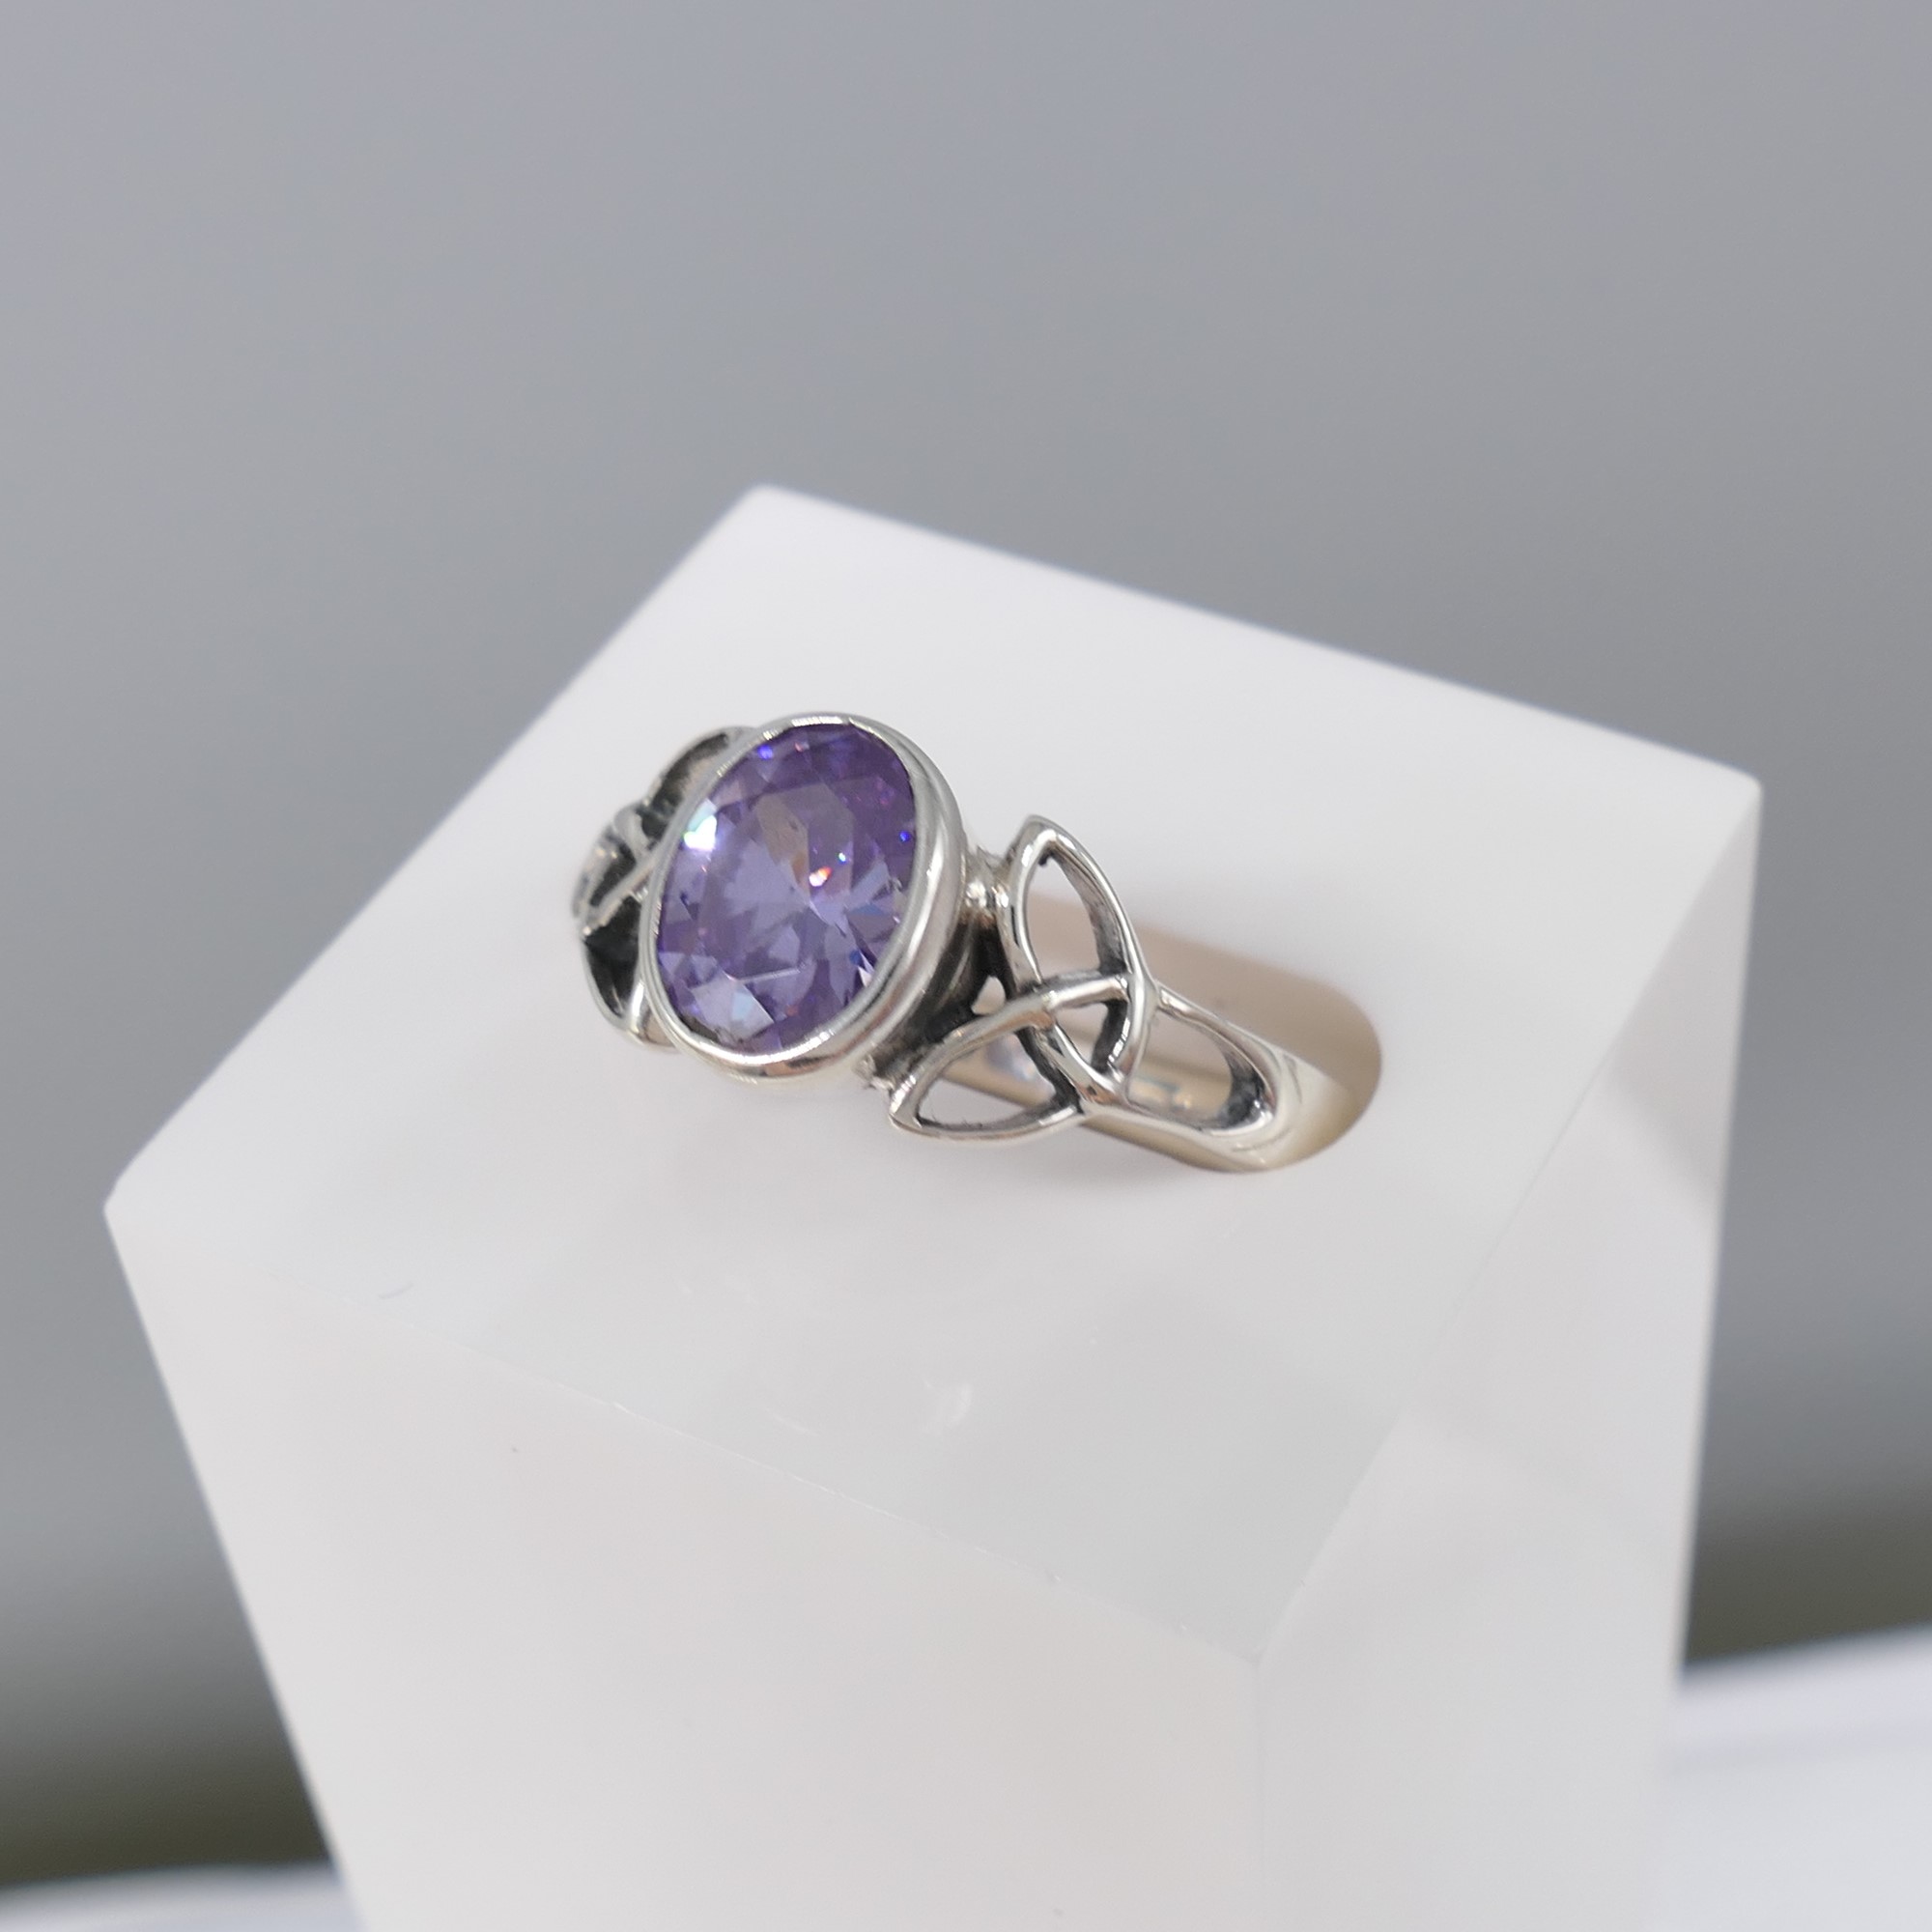 Sterling silver Celtic-style dress ring set with an oval purple cubic zirconia - Image 6 of 6